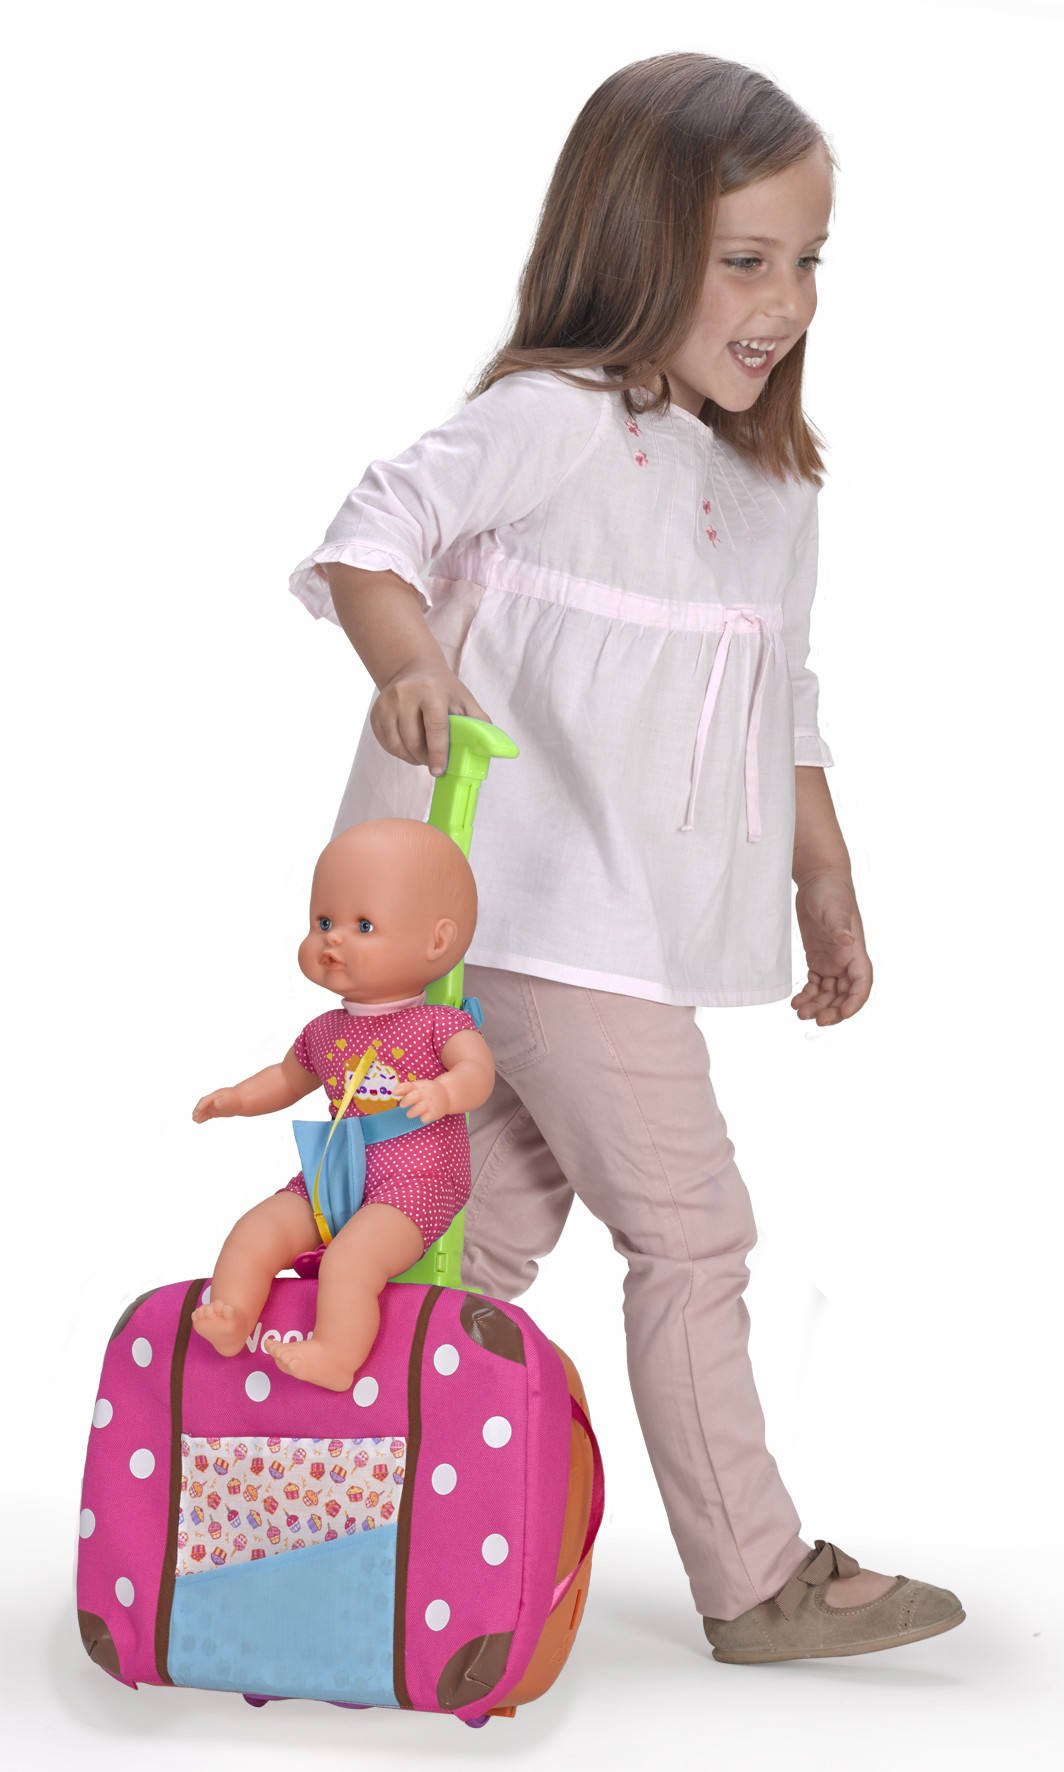 Nenuco Always with Me Baby Doll with Travel Bag Play Set